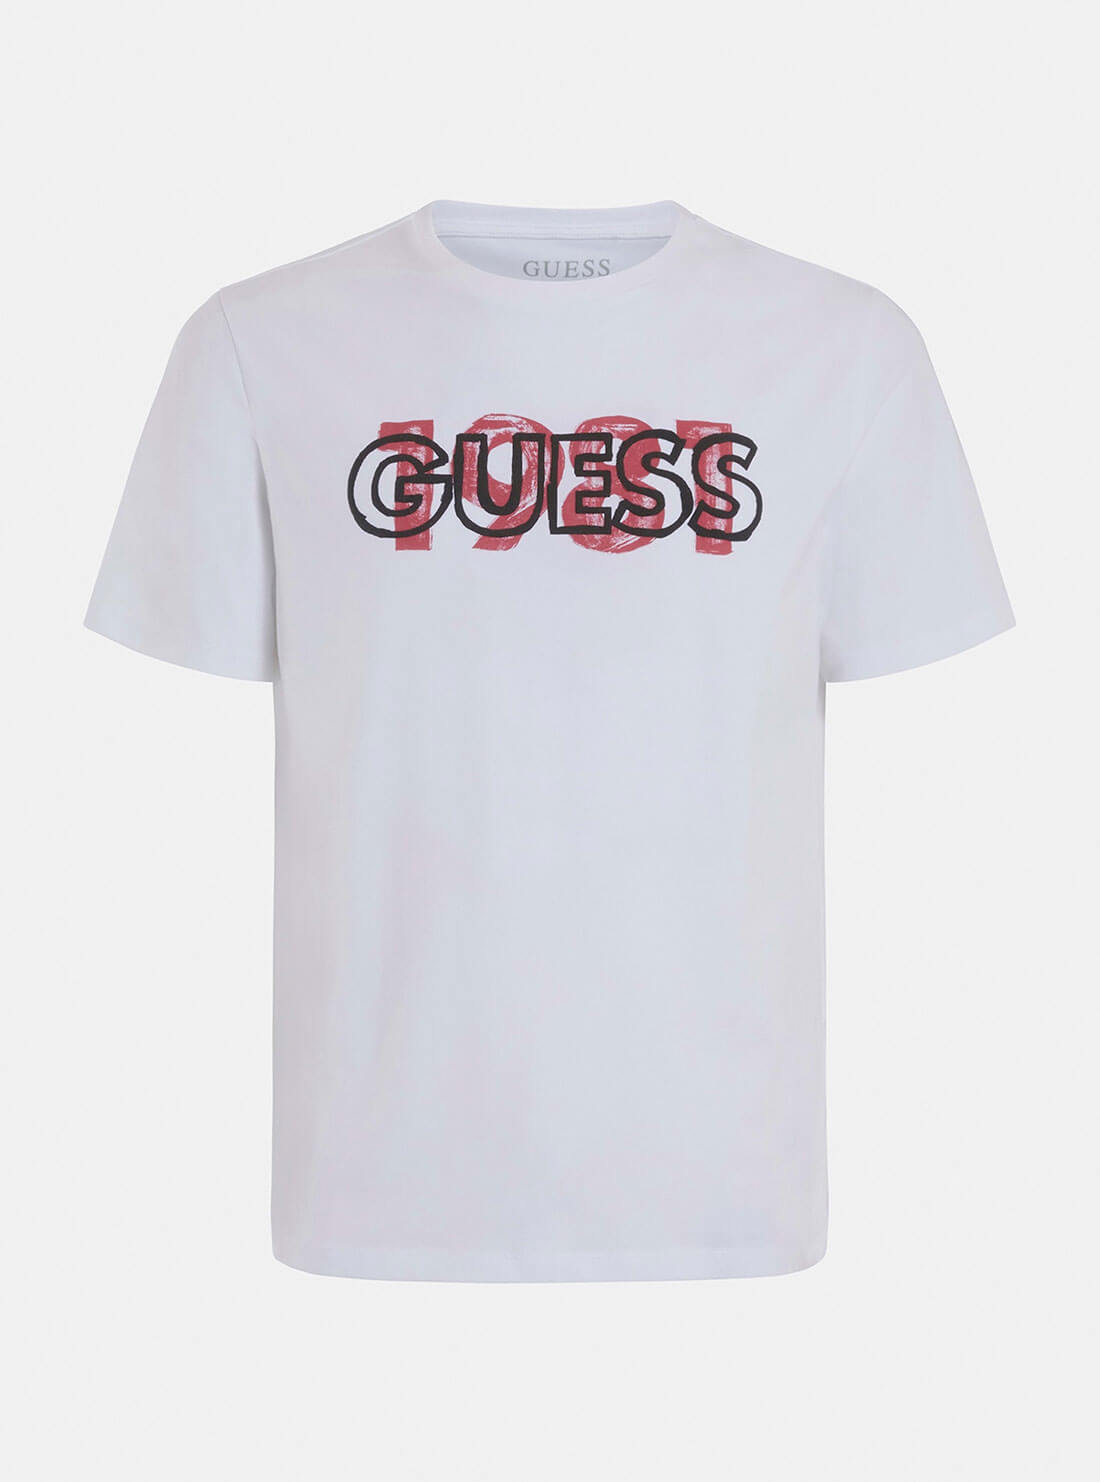 GUESS Mens Eco White Orwell Logo T-Shirt M2GI09J1311 Ghost Front View